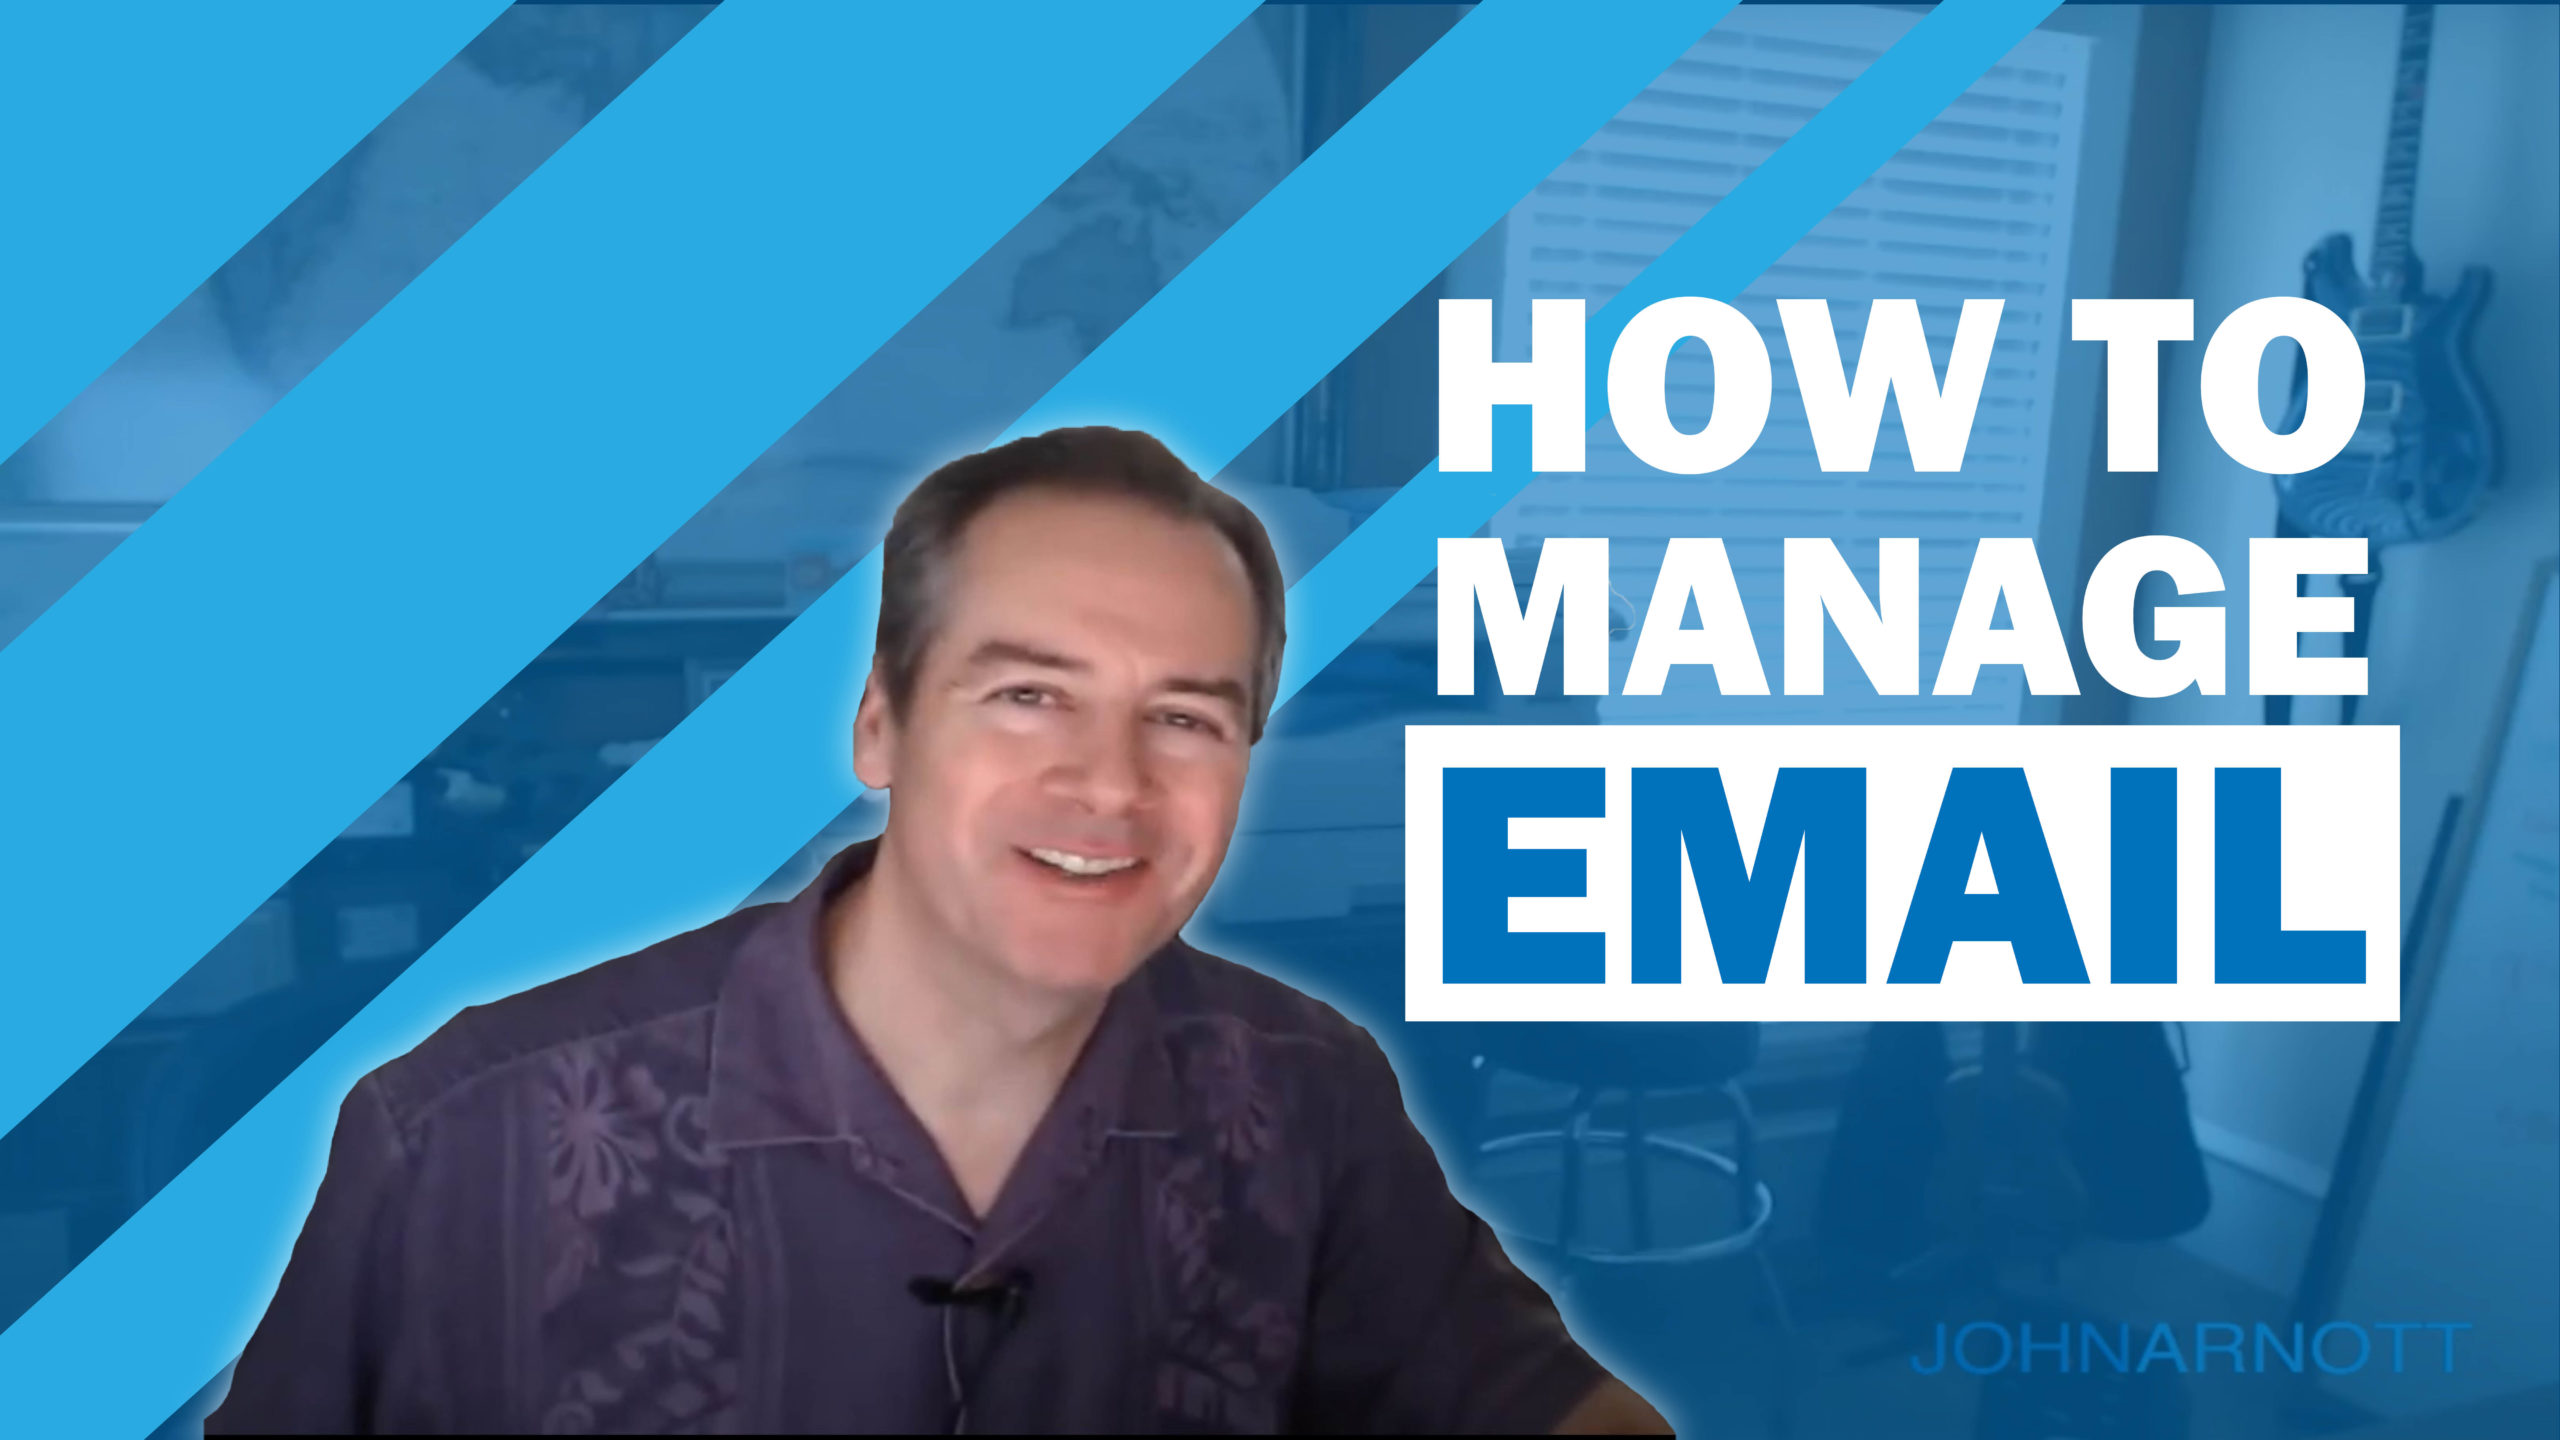 Getting Things Done – How to Manage Email